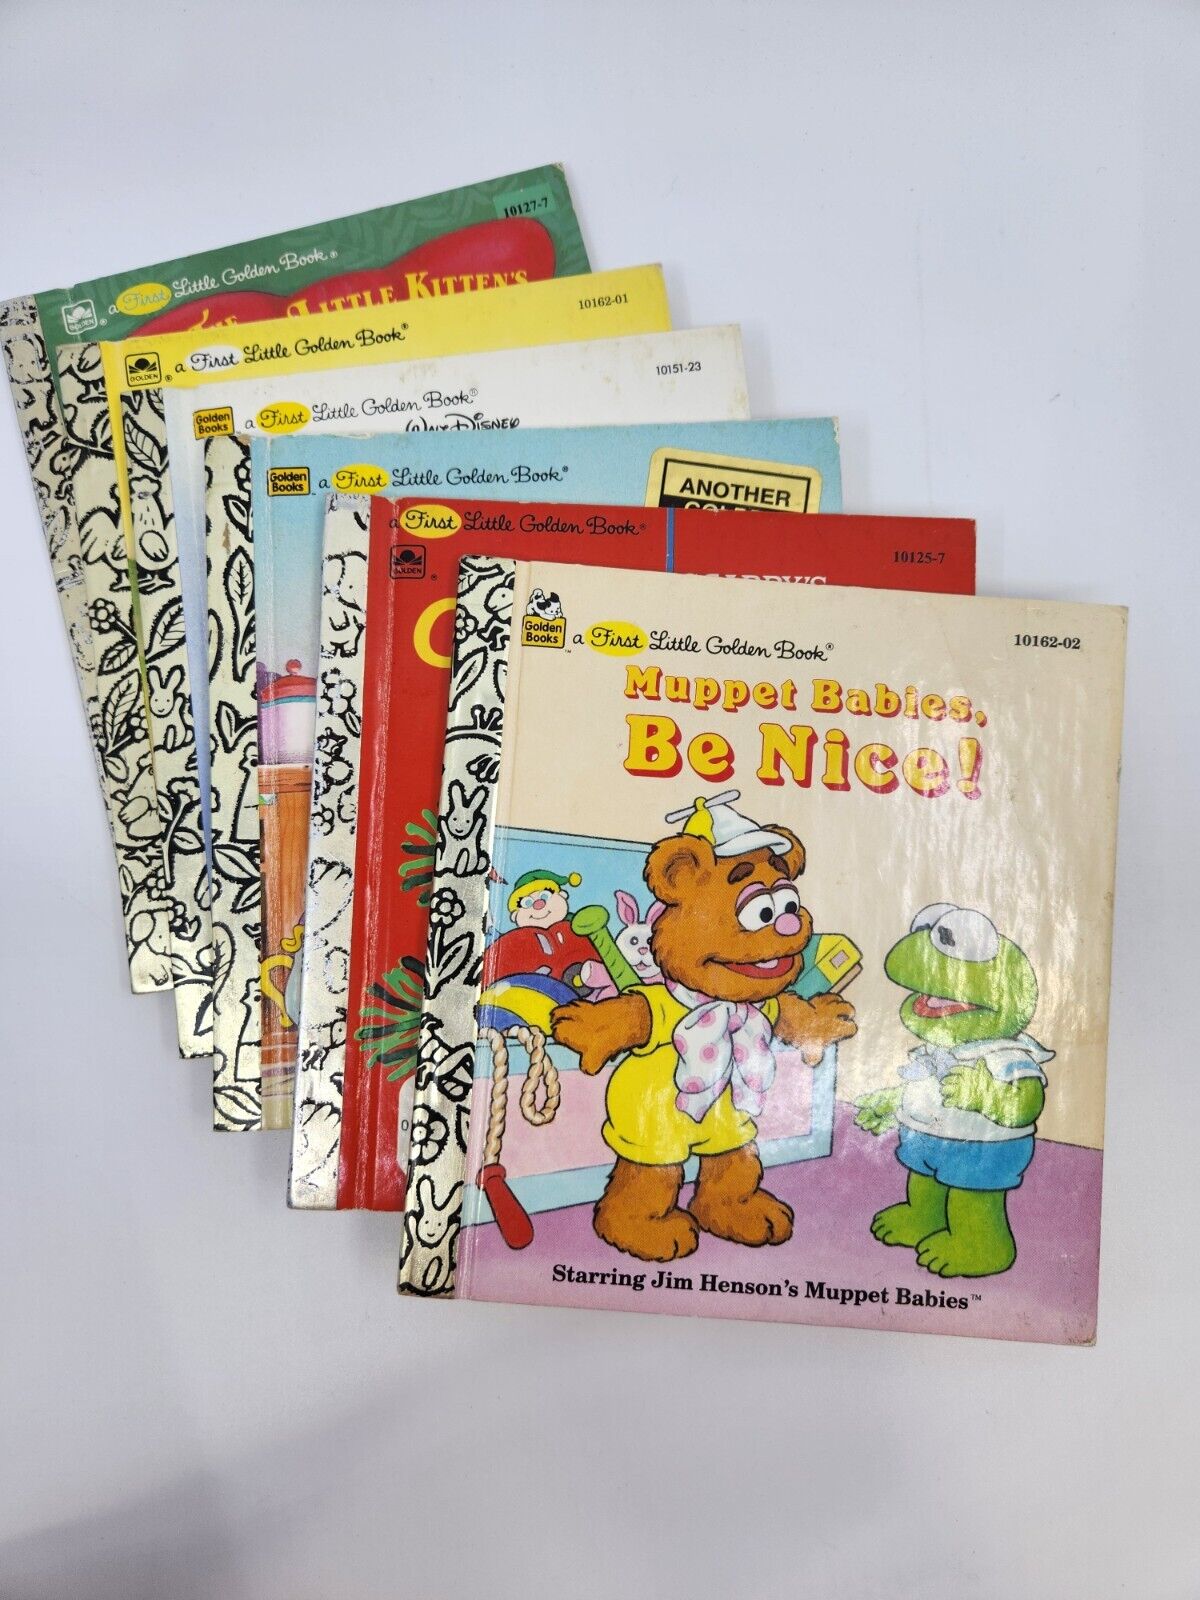 Lot of 6 Mini Vintage A First Little Golden Books Muppet Babies Dumbo Xmas Mice